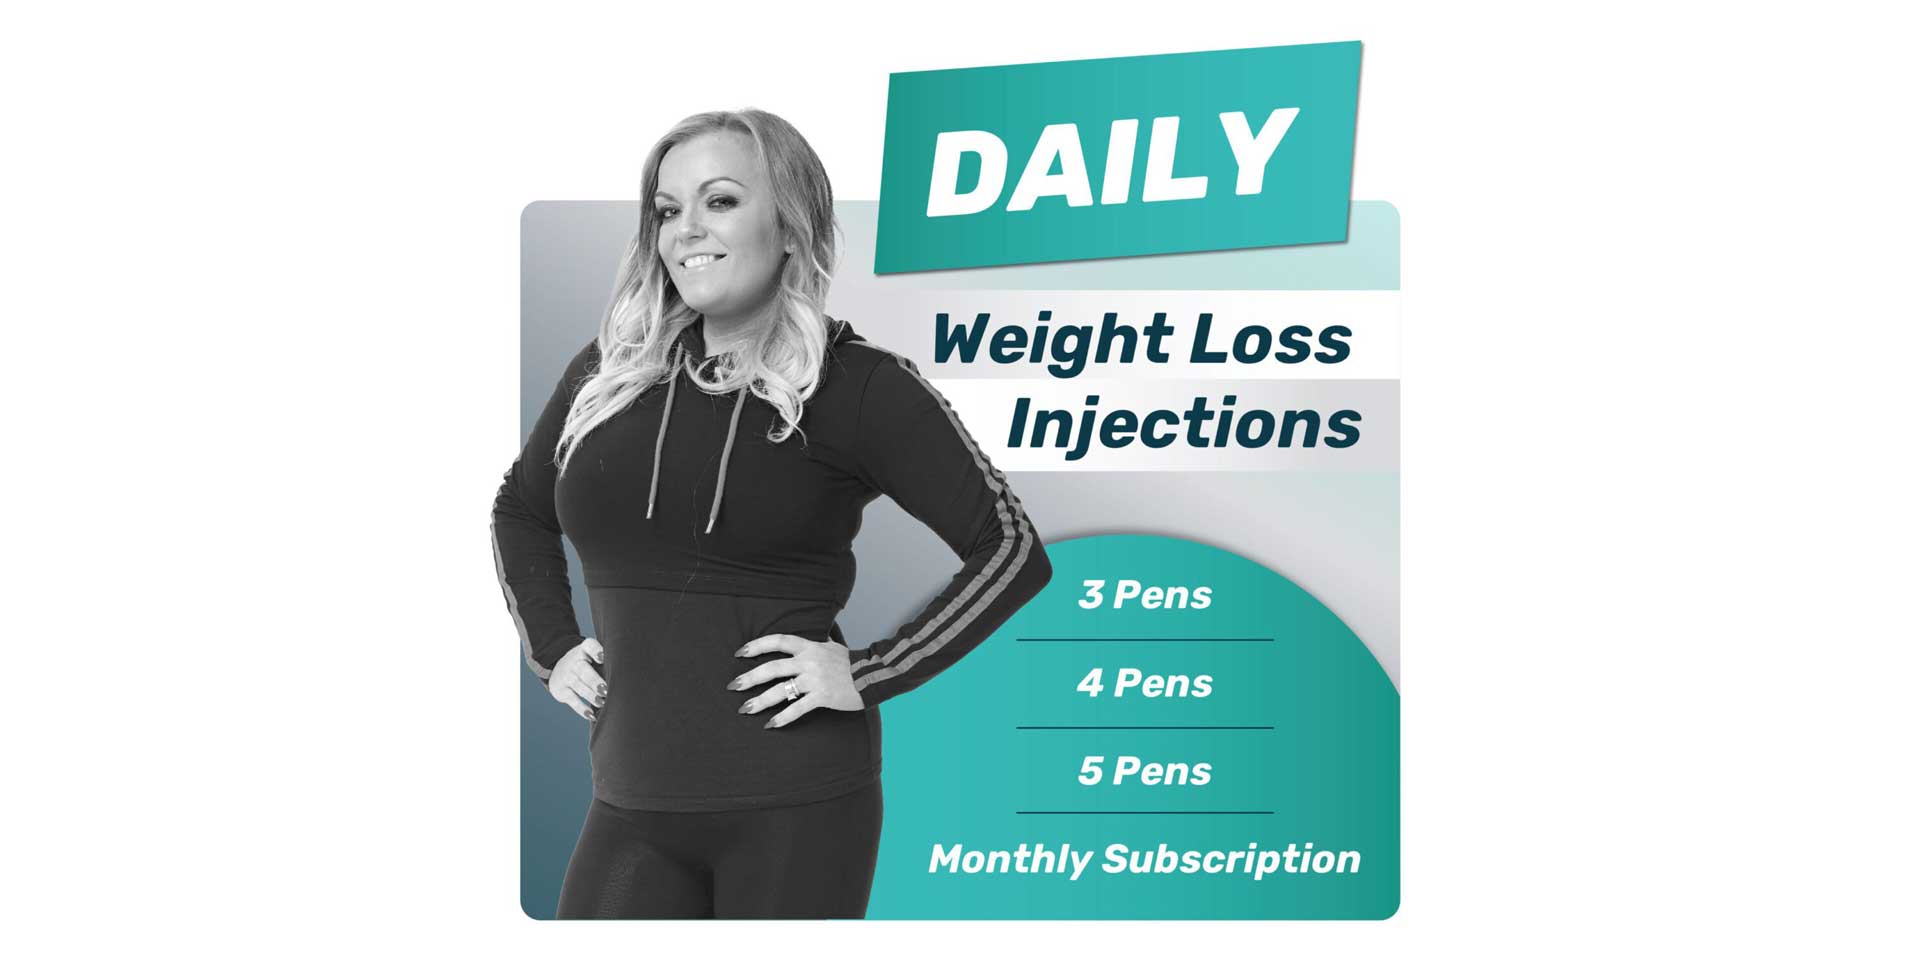 Everything you need to know about Wegovy weight loss injections